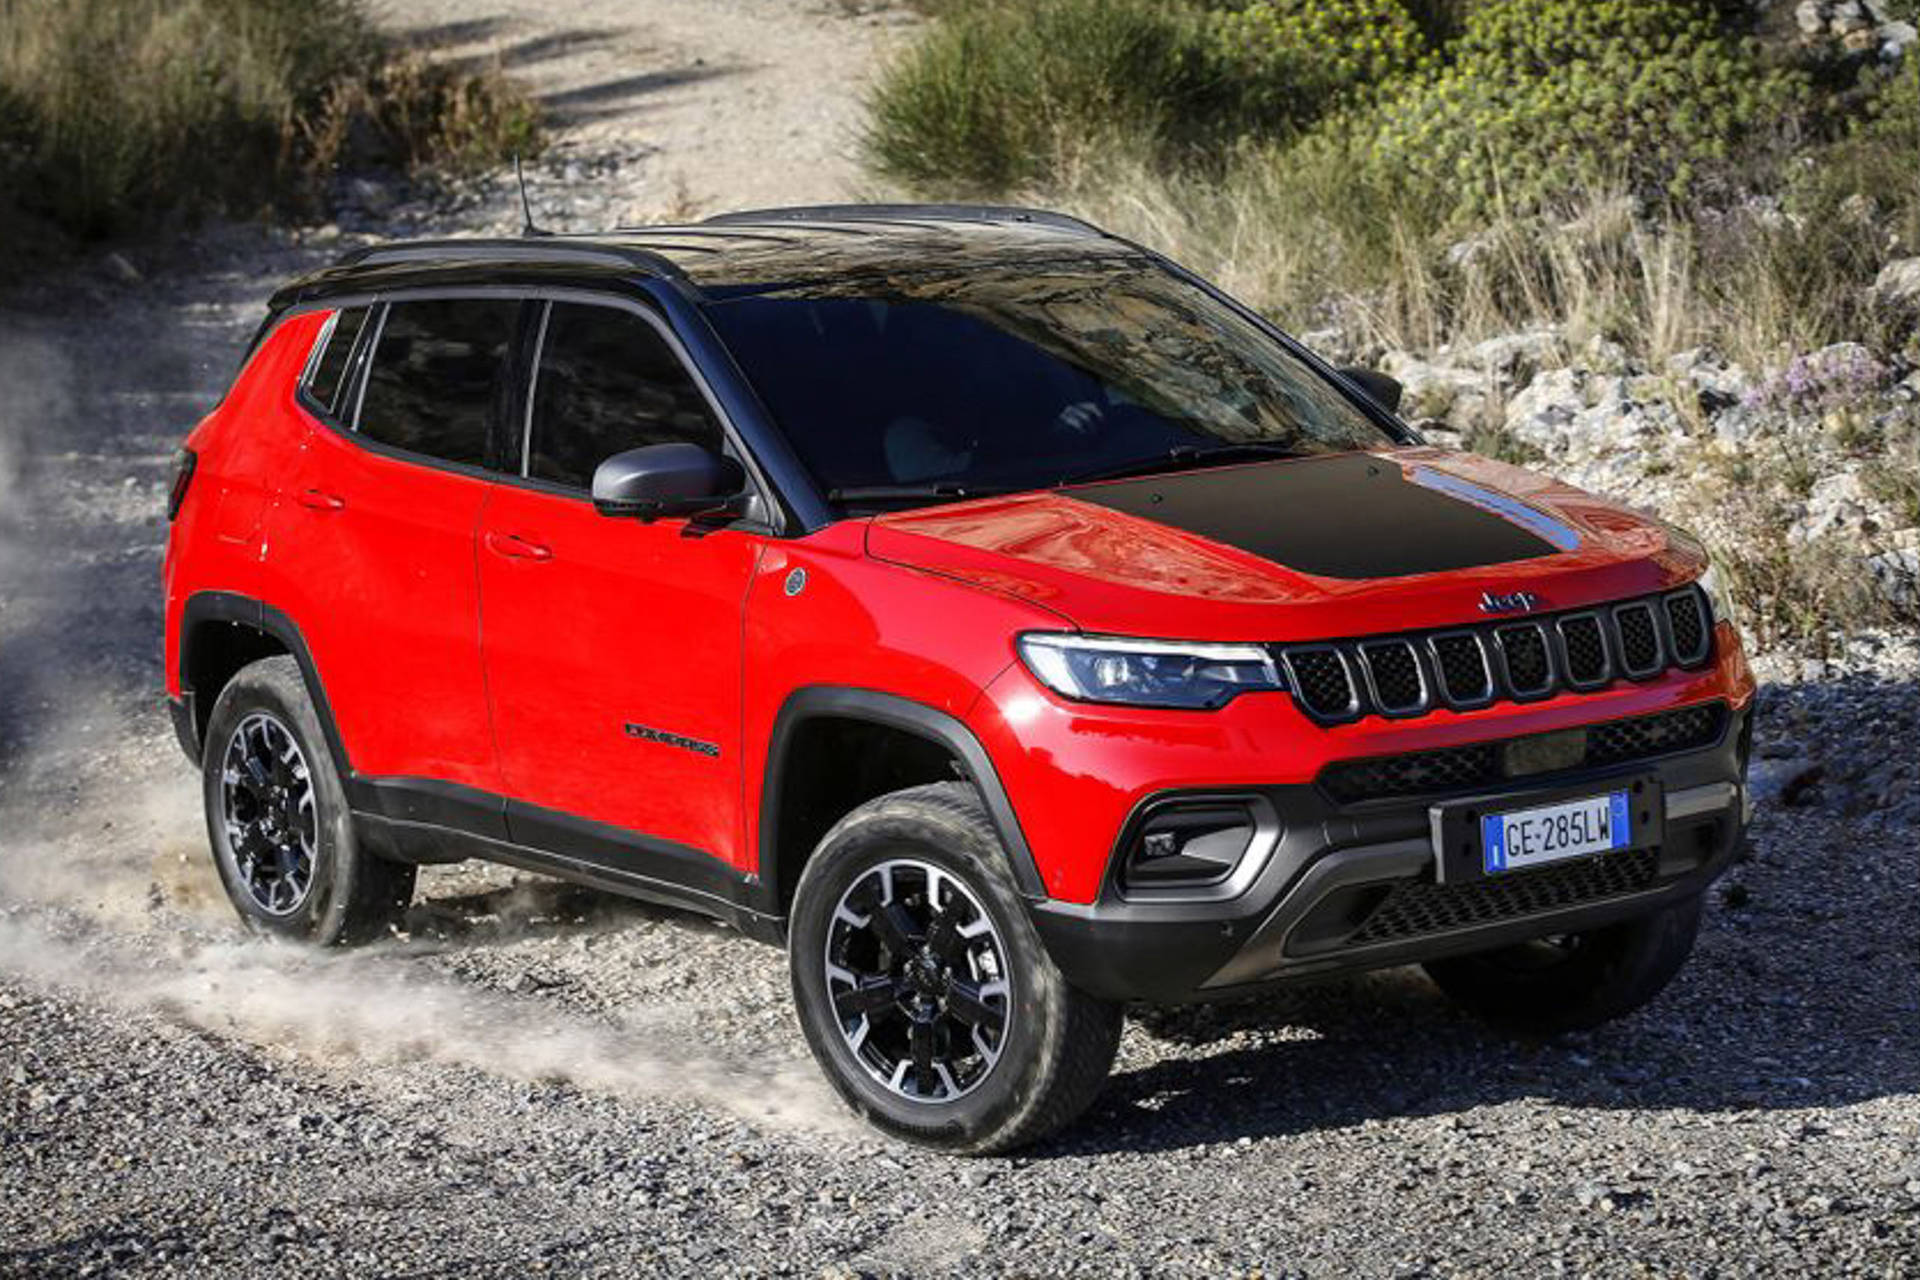 Majestic Black and Red Jeep Compass Dominating the Gravel Road Wallpaper